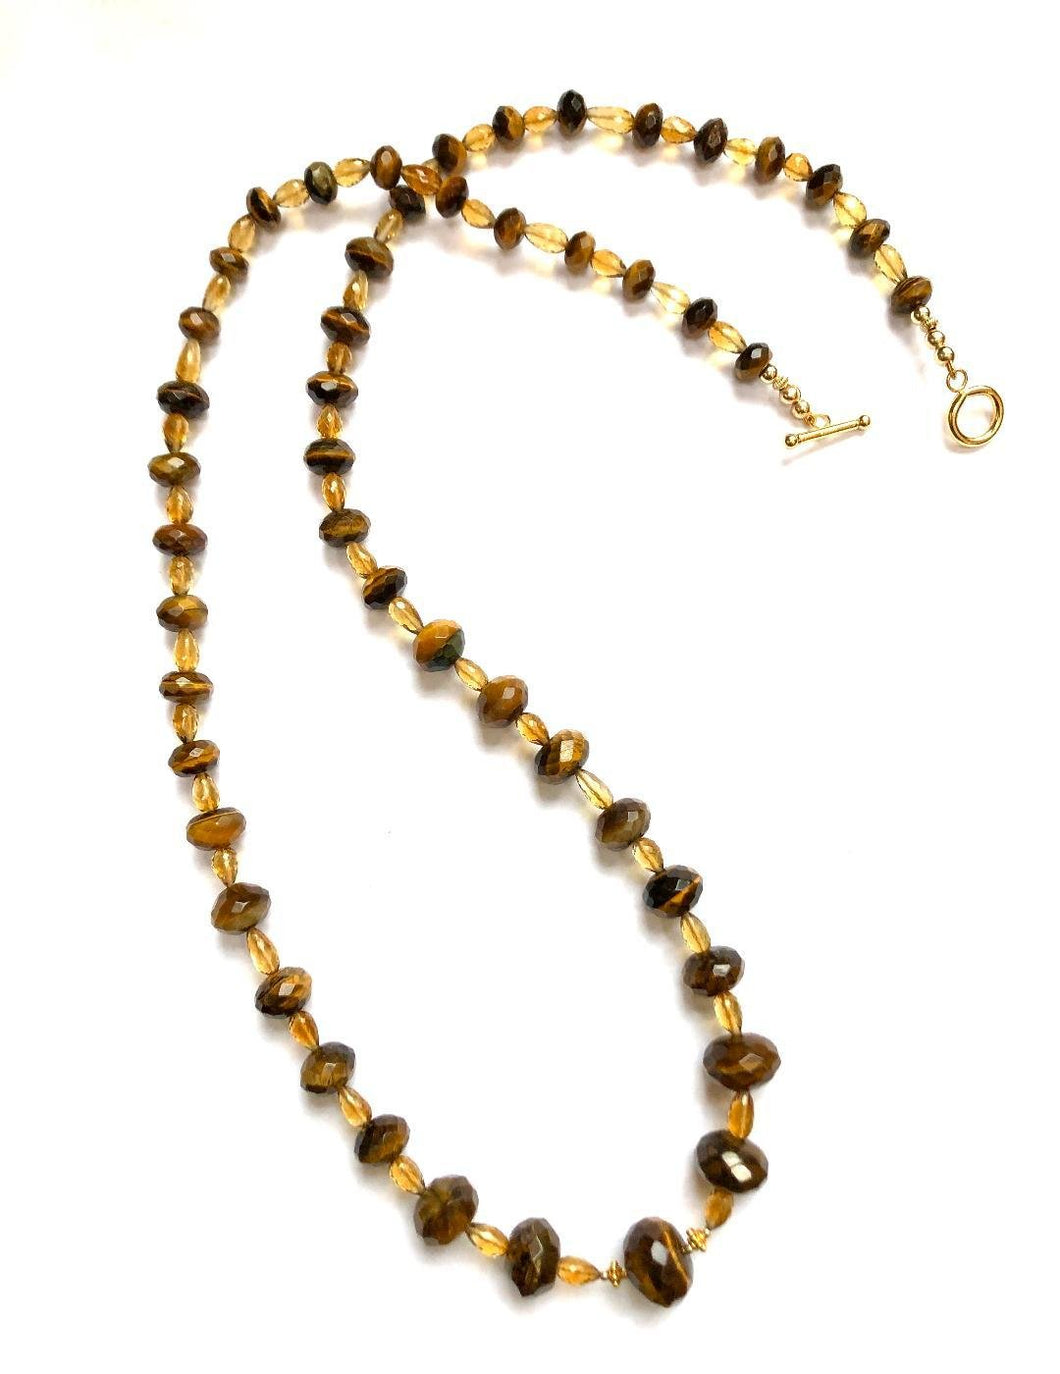 An Exciting Find!!  Unusual, Faceted Tiger Eye Gemstone Necklace